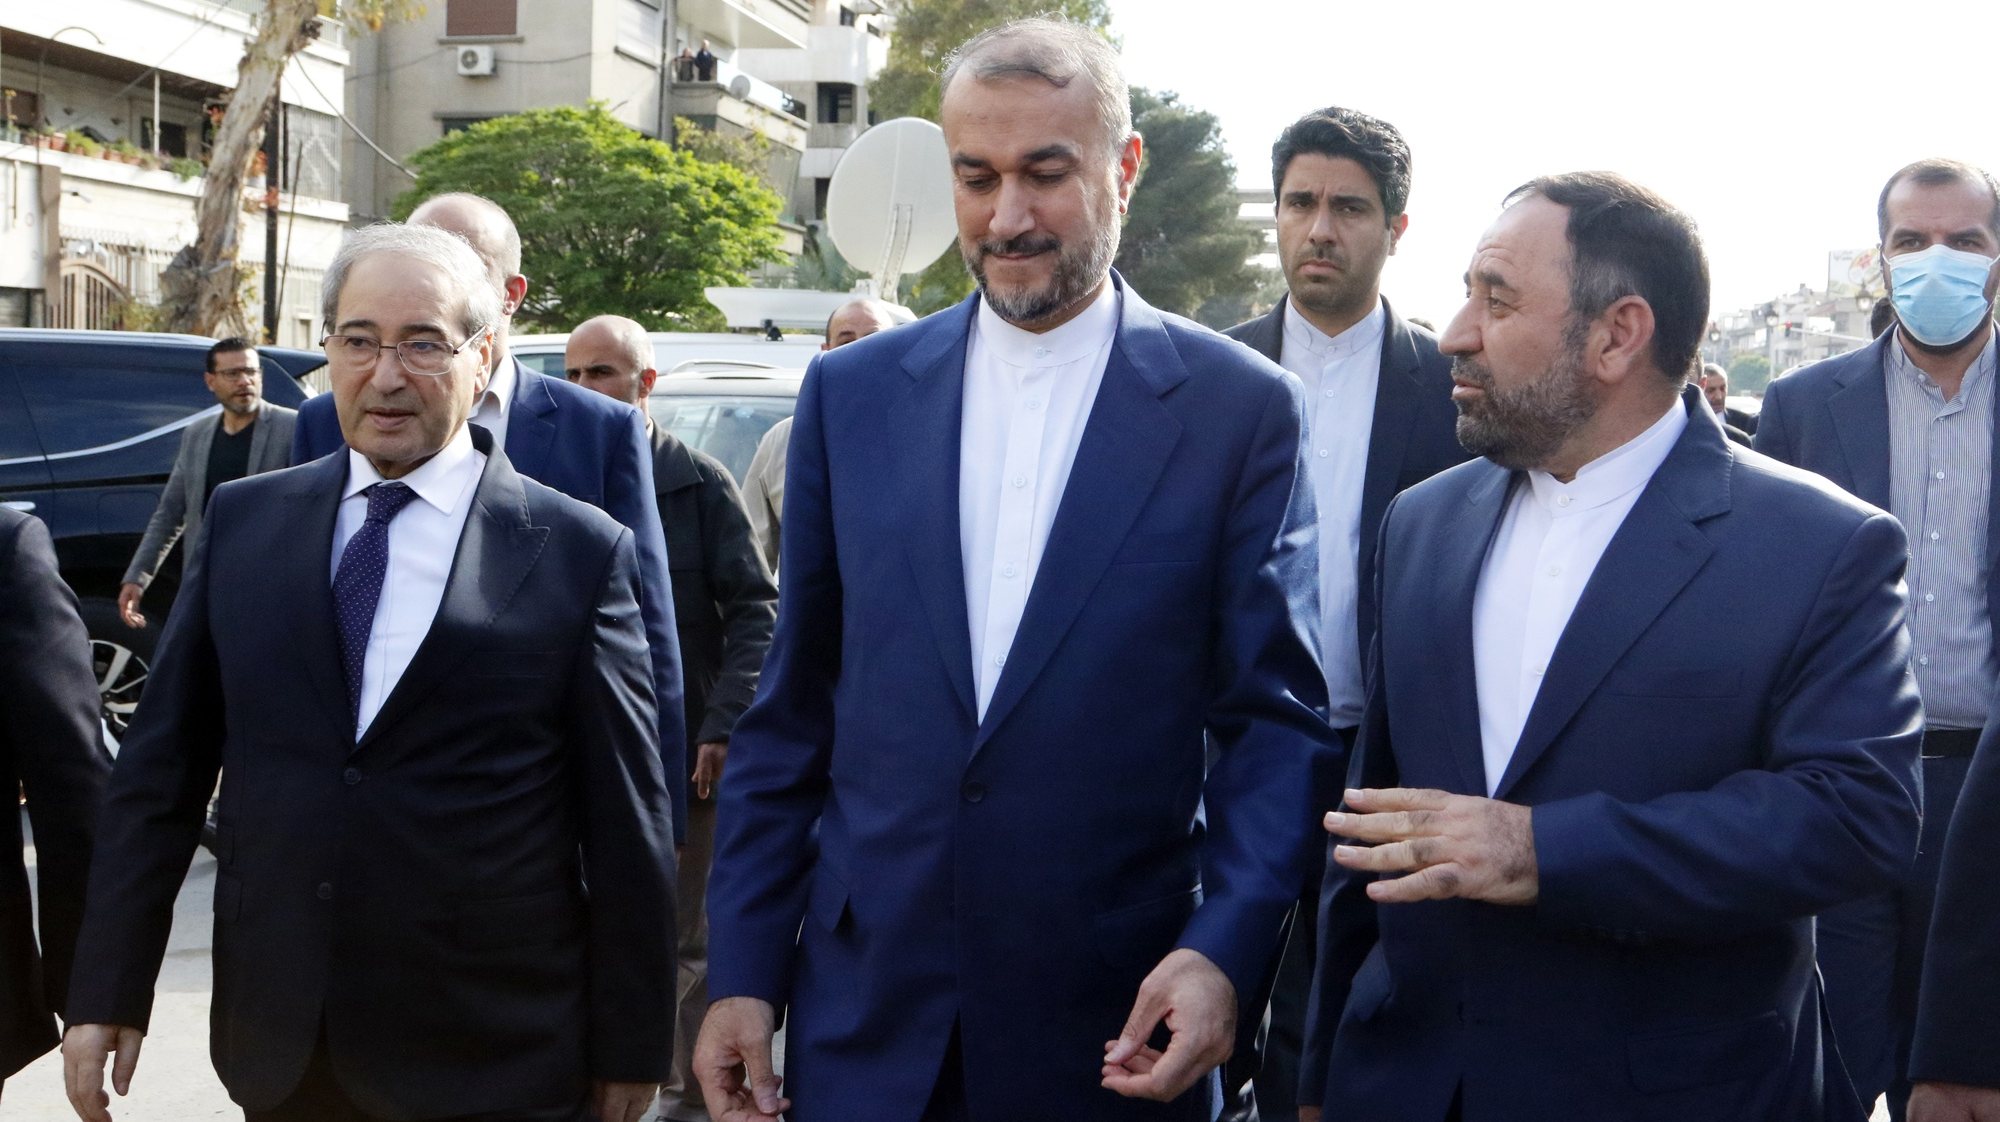 epa11265949 Iranian Foreign Minister Hossein Amir-Abdollahian (C) with Syrian Foreign Minister Faisal Mekdad (L) visit destroyed Iranian consulate site in Damascus, Syria, 08 April 2024. Iran&#039;s foreign minister is in Damascus to inaugurate new Iranian consular services, a week after an April 1 airstrike on the Iranian consulate building in the Syrian capital Damascus that Iran blamed on Israel.  EPA/YOUSSEF BADAWI